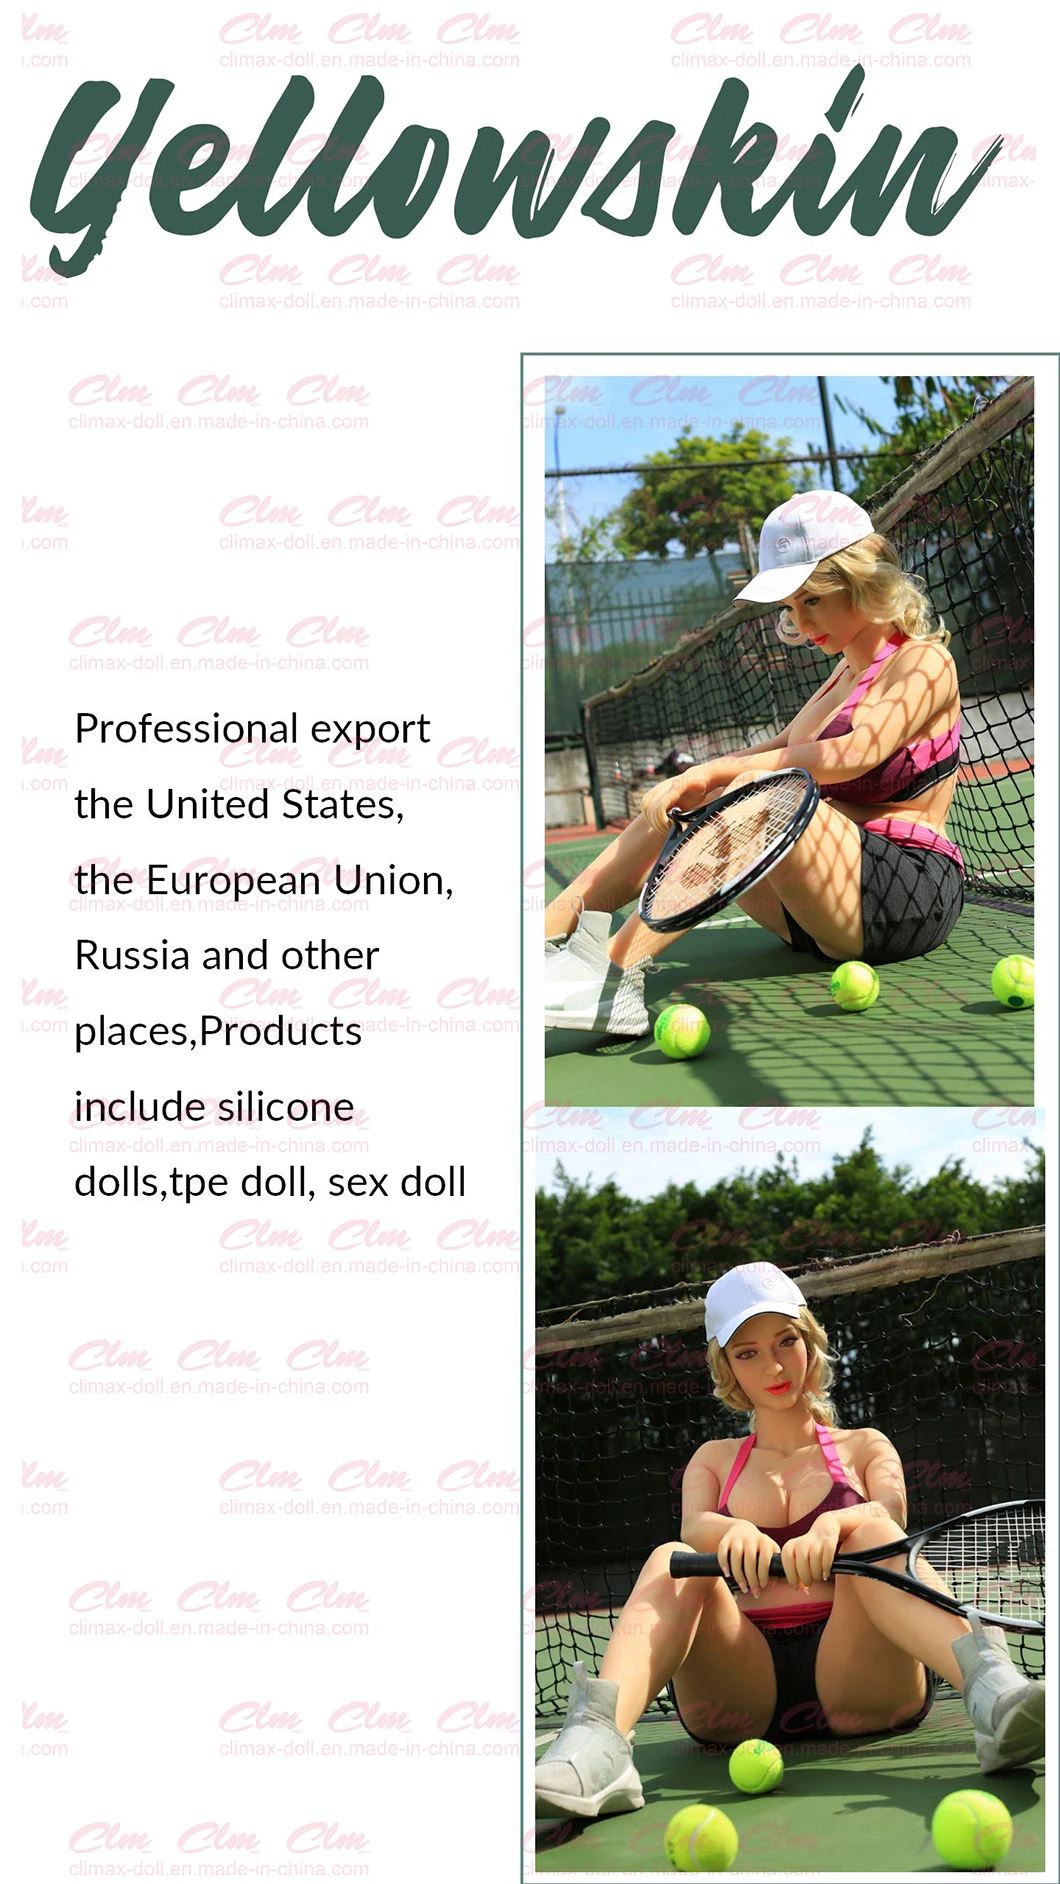 Clm (Climax Doll) 160cm Huge Breast Chest Love Doll Silicone Lifelike Girl Sex Doll Sex Toy